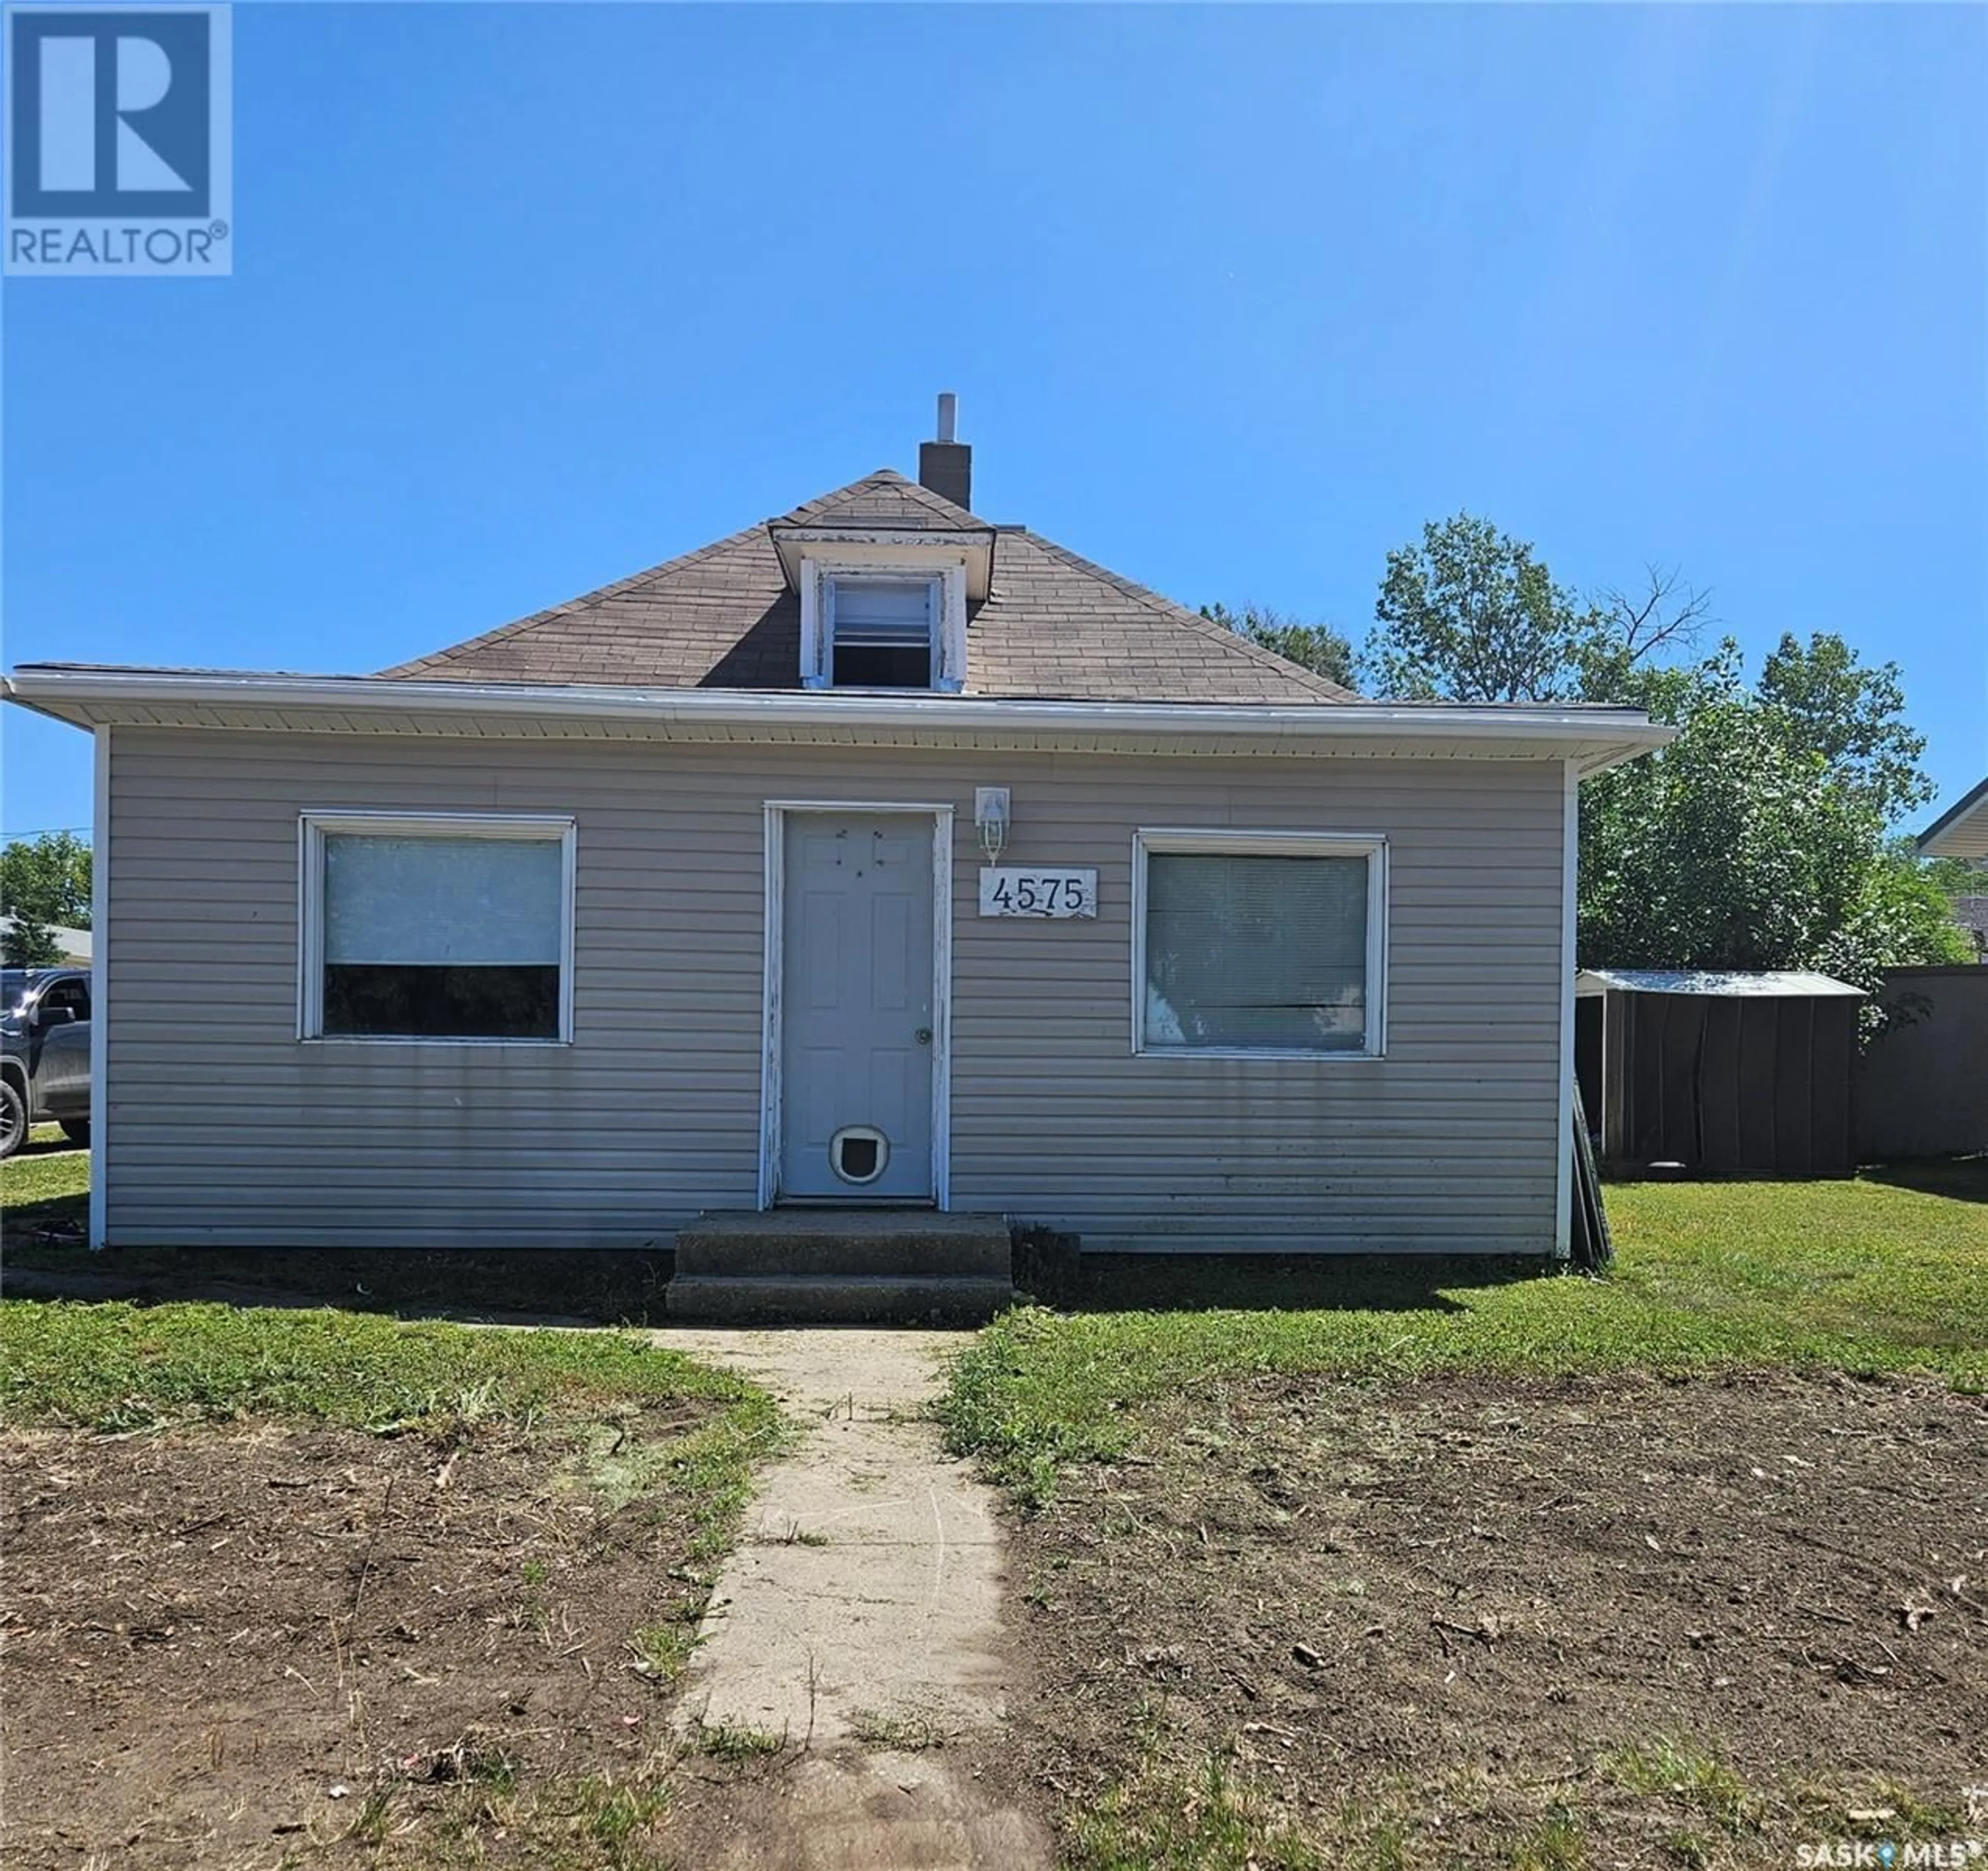 Frontside or backside of a home for 4575 Price AVENUE, Gull Lake Saskatchewan S0N1A0